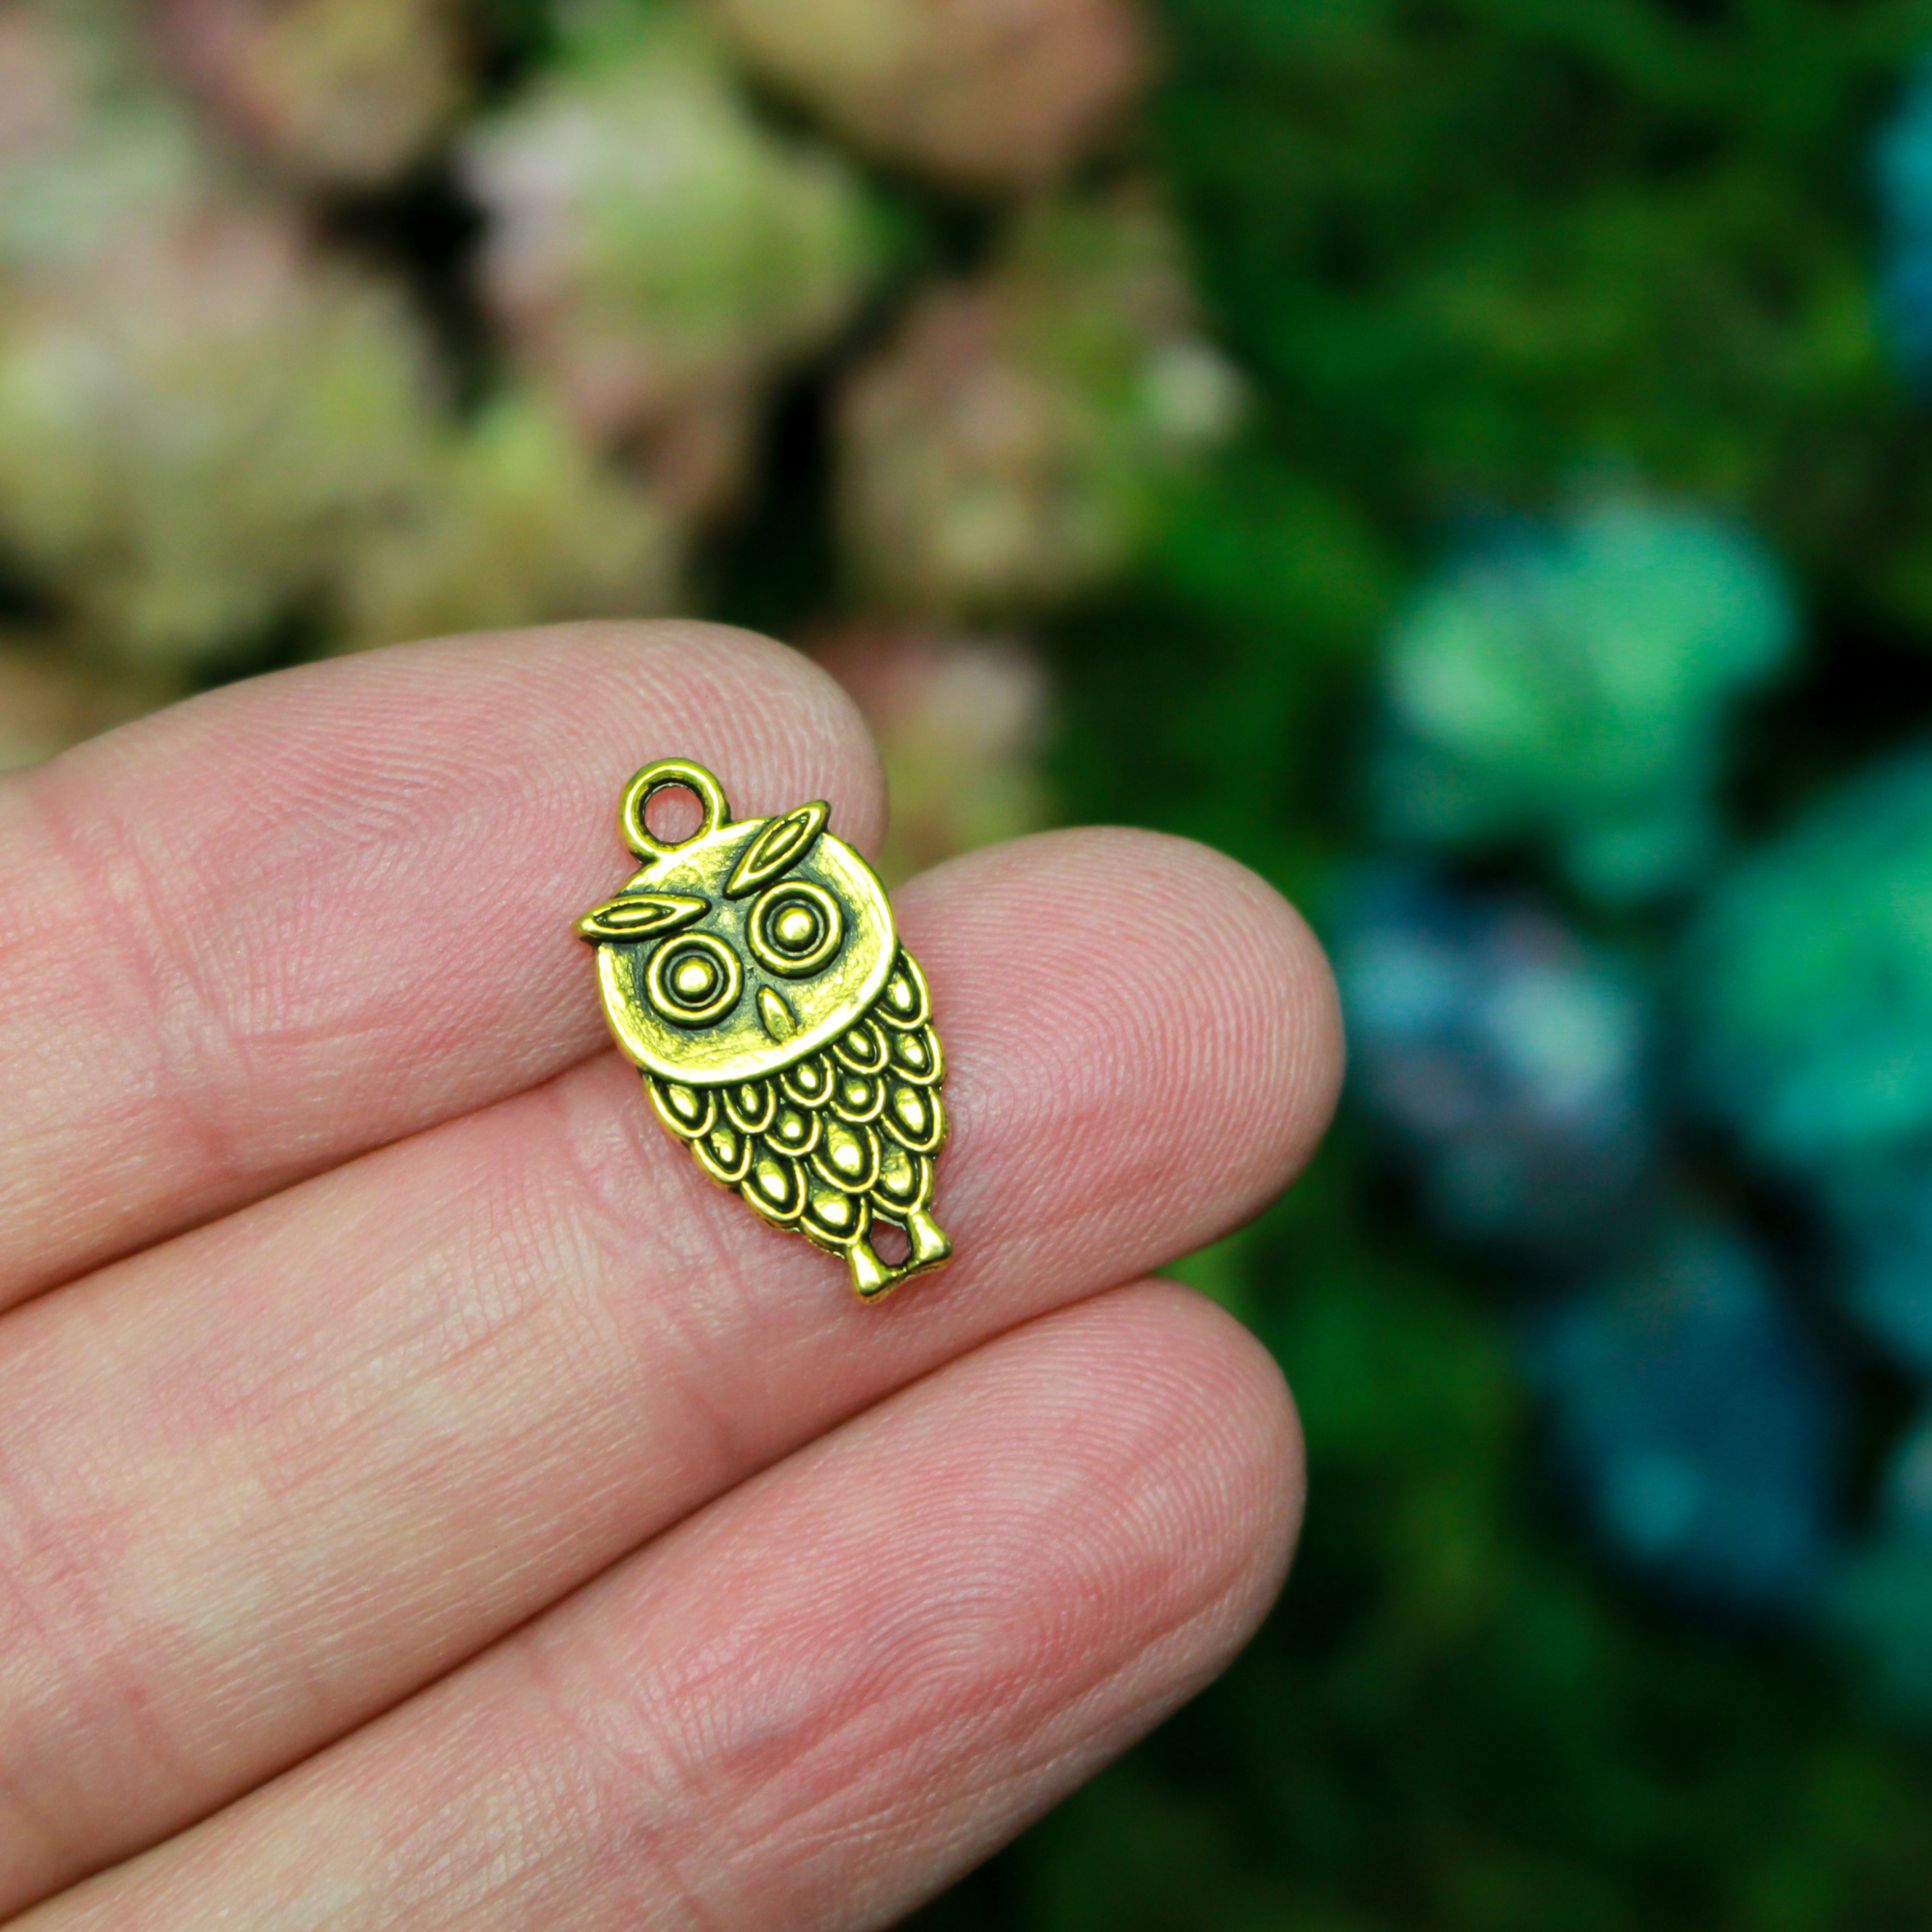 Small owl charm in an antiqued gold tone color, 18mm long